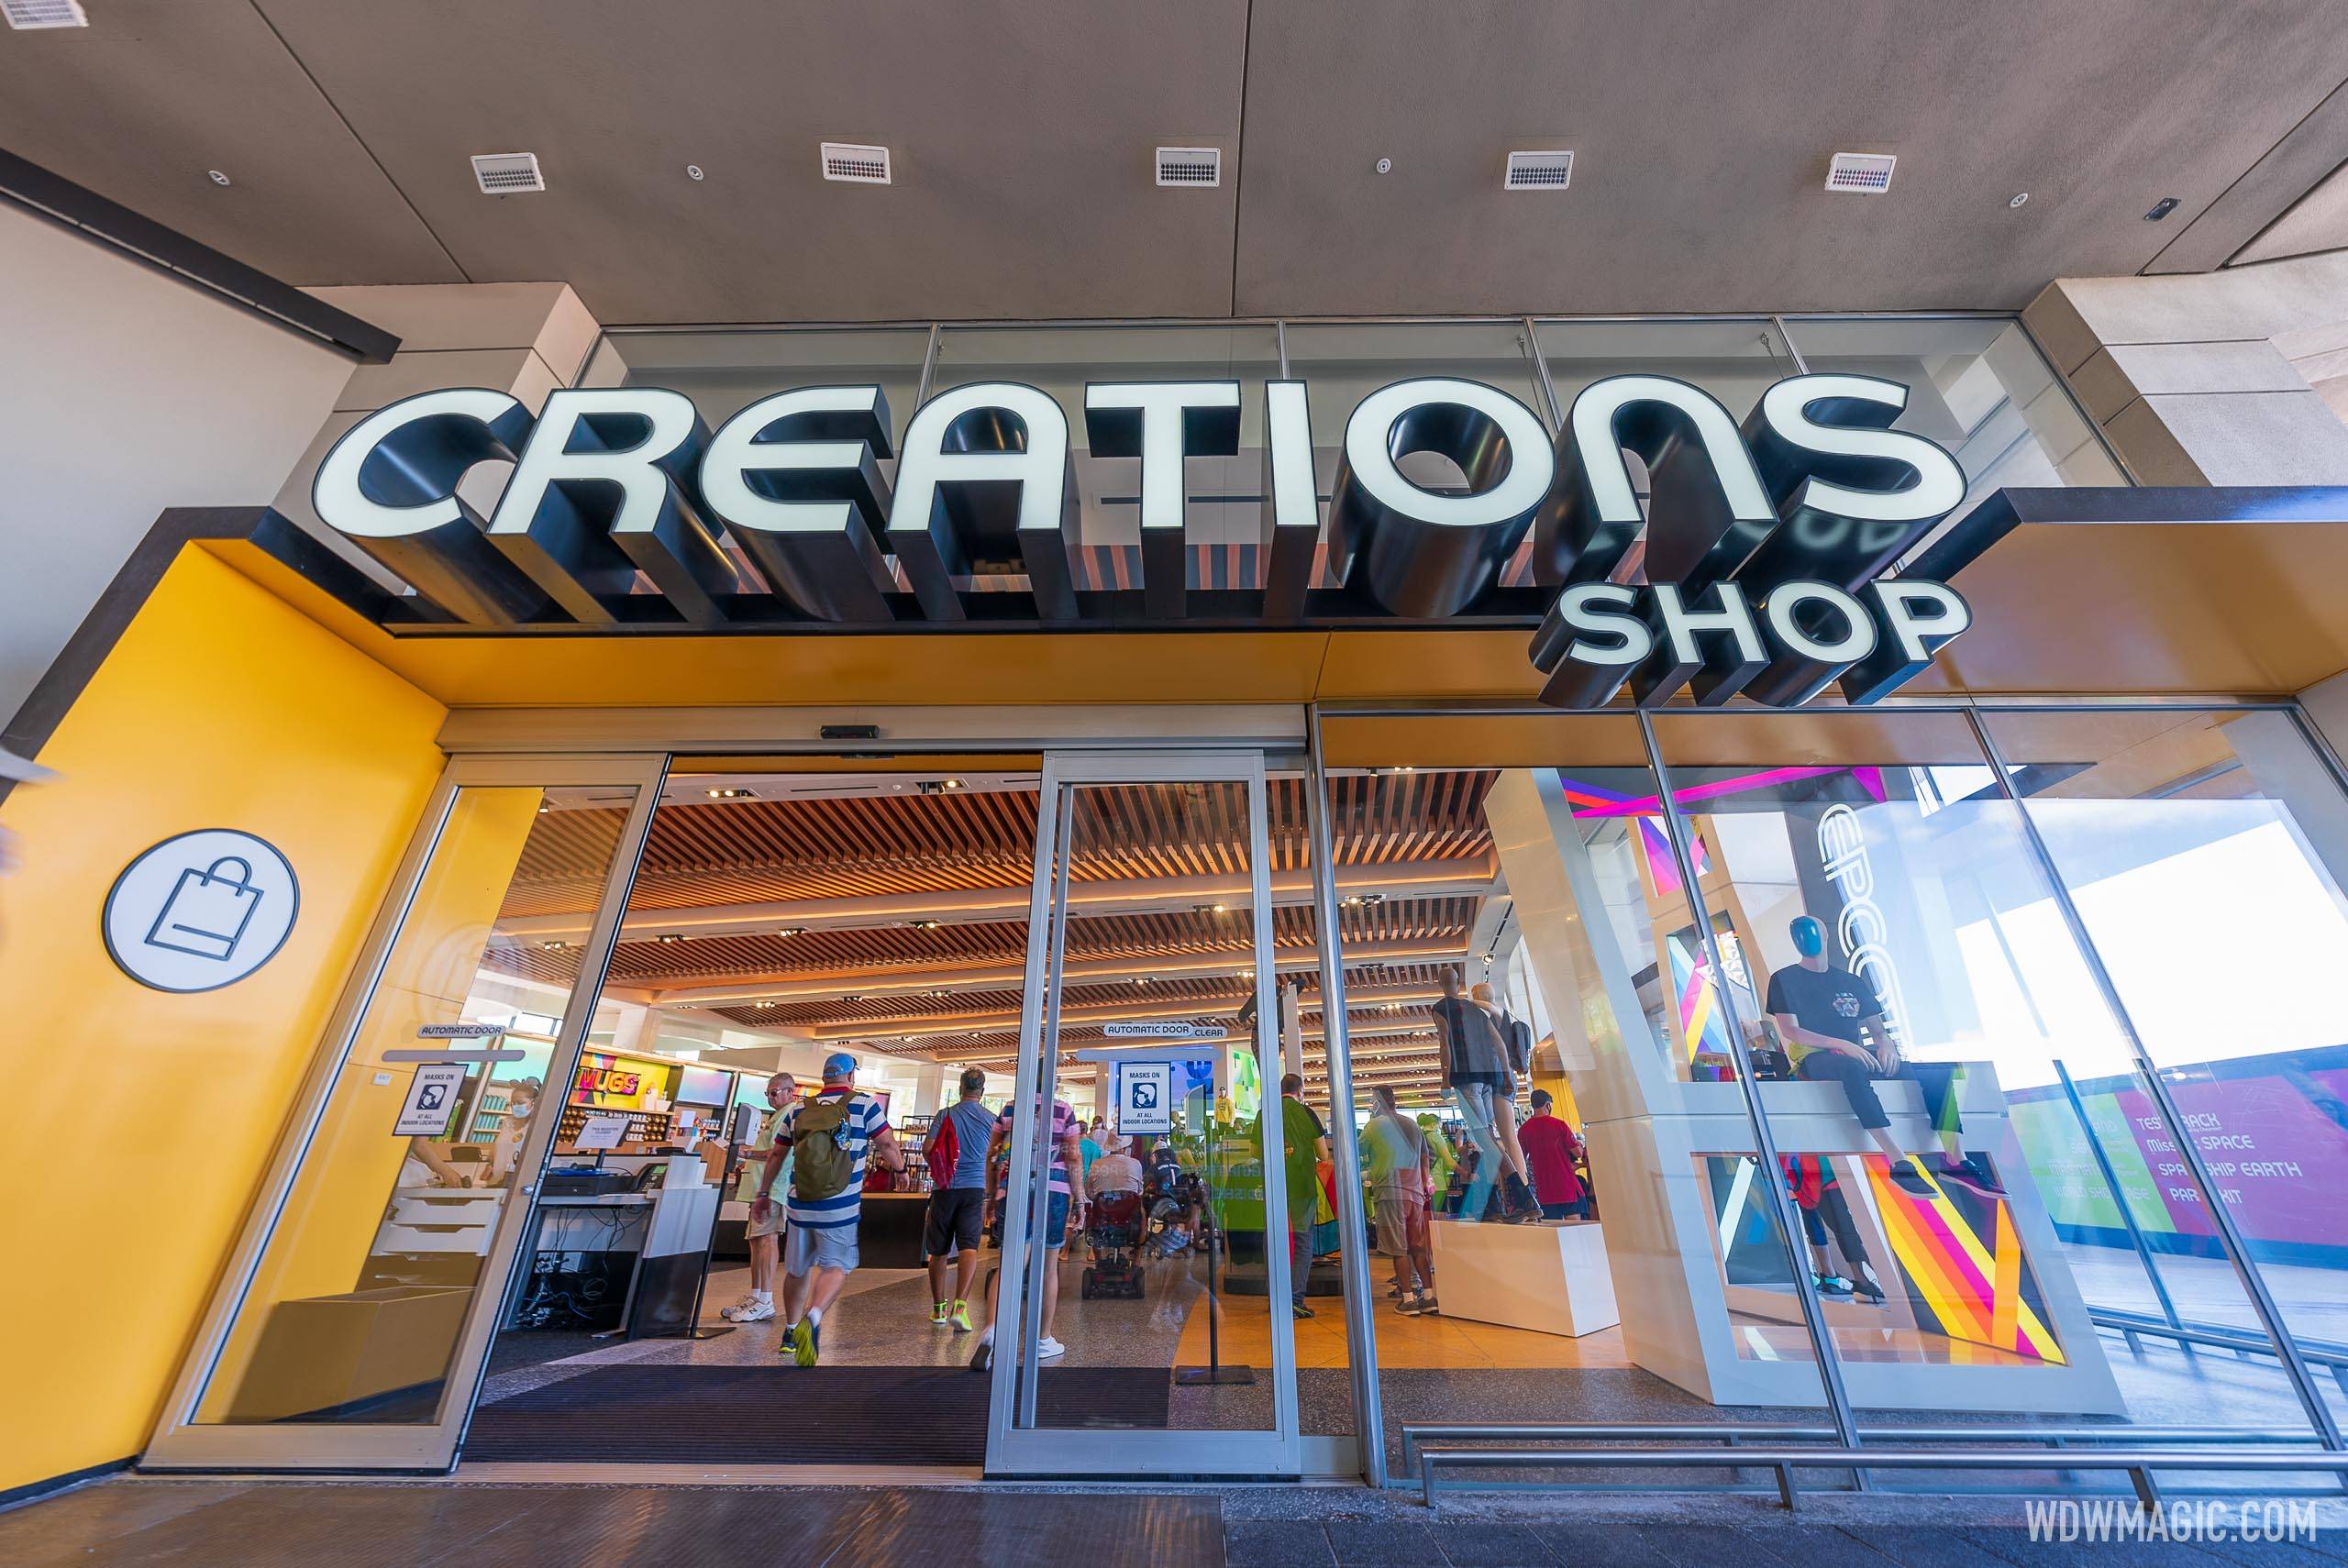 Opening Day at Creations Shop